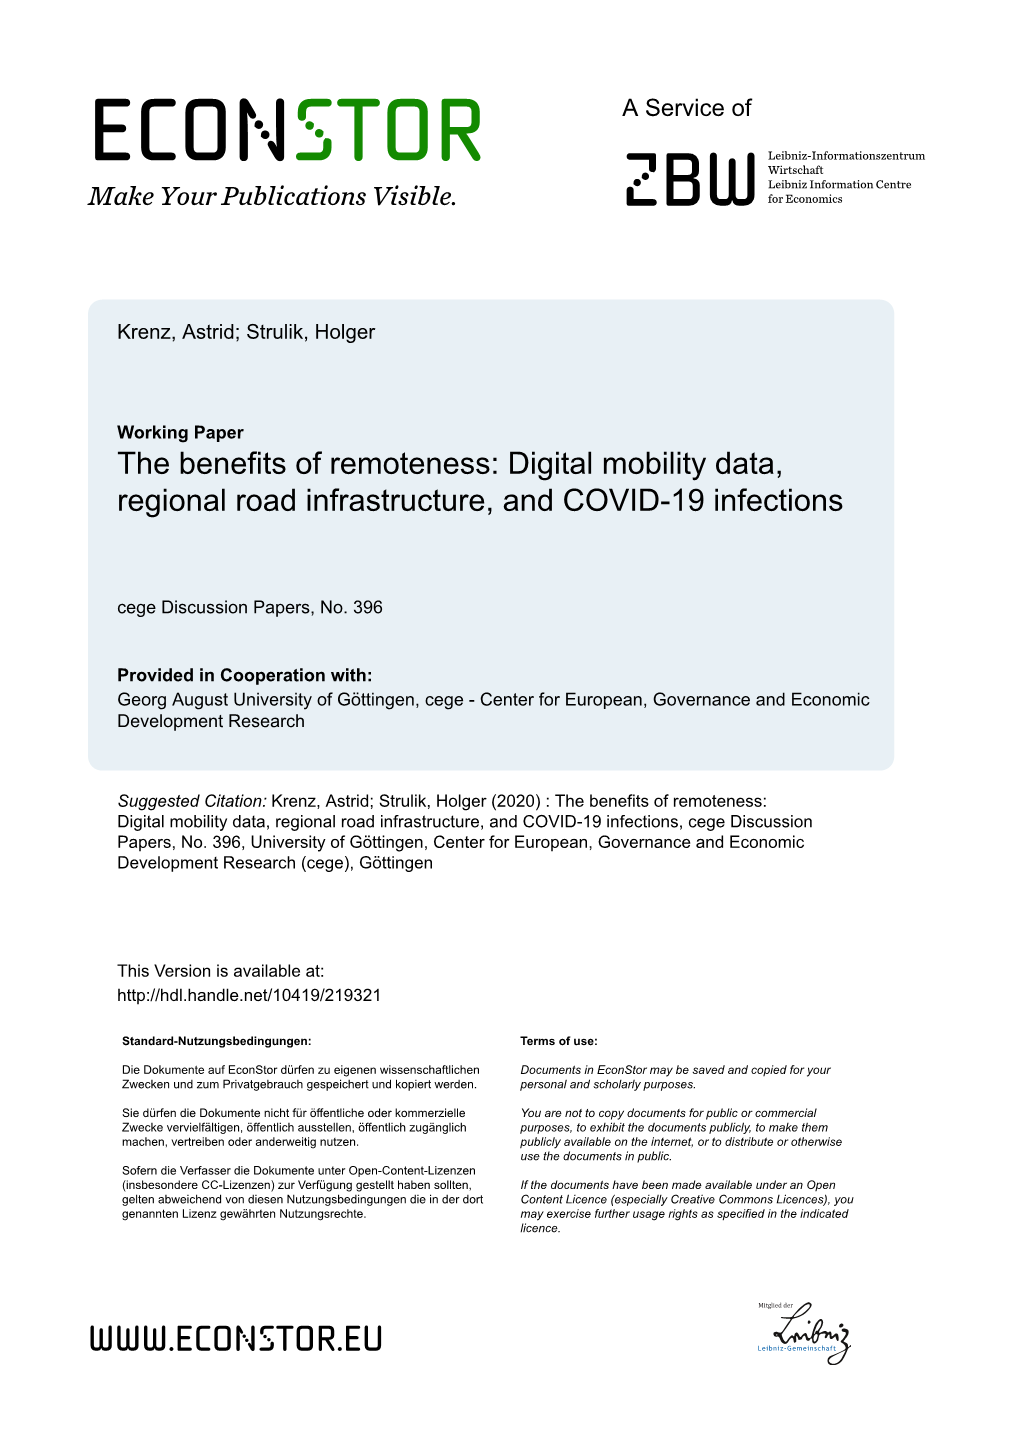 Digital Mobility Data, Regional Road Infrastructure, and COVID-19 Infections